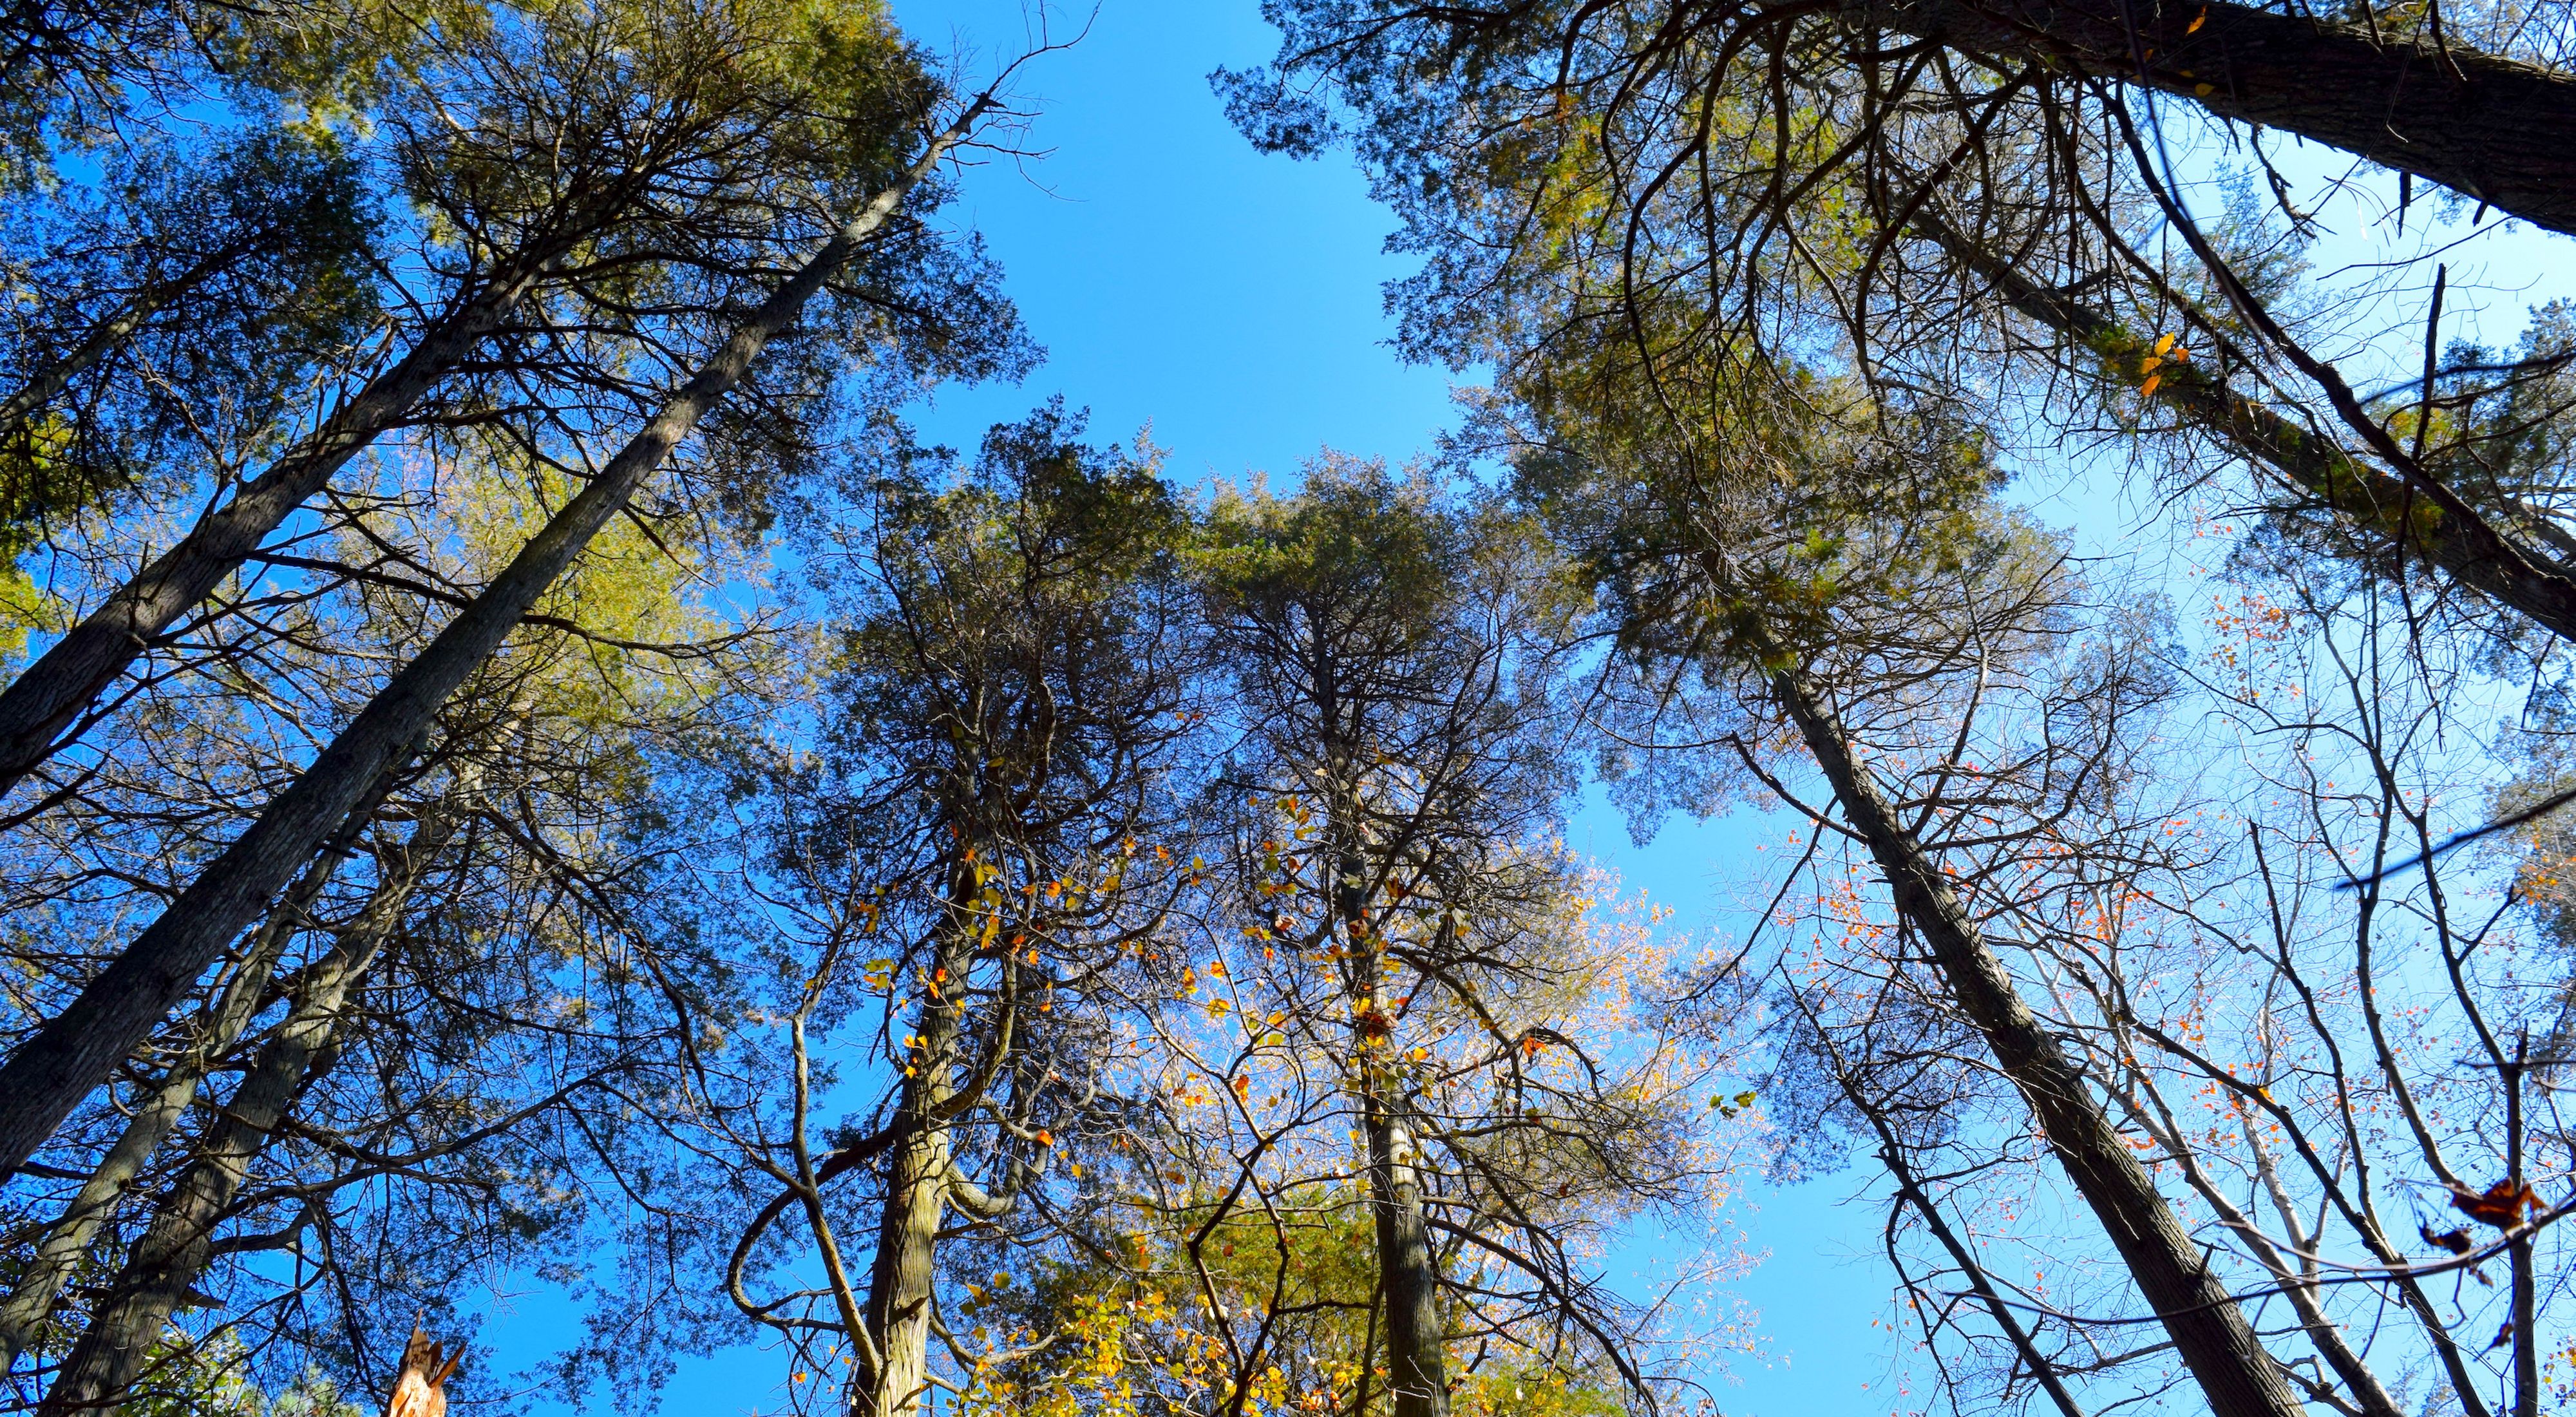 A view to the sky from the forest floor of the tops of tall Atlantic White Cedar Trees.